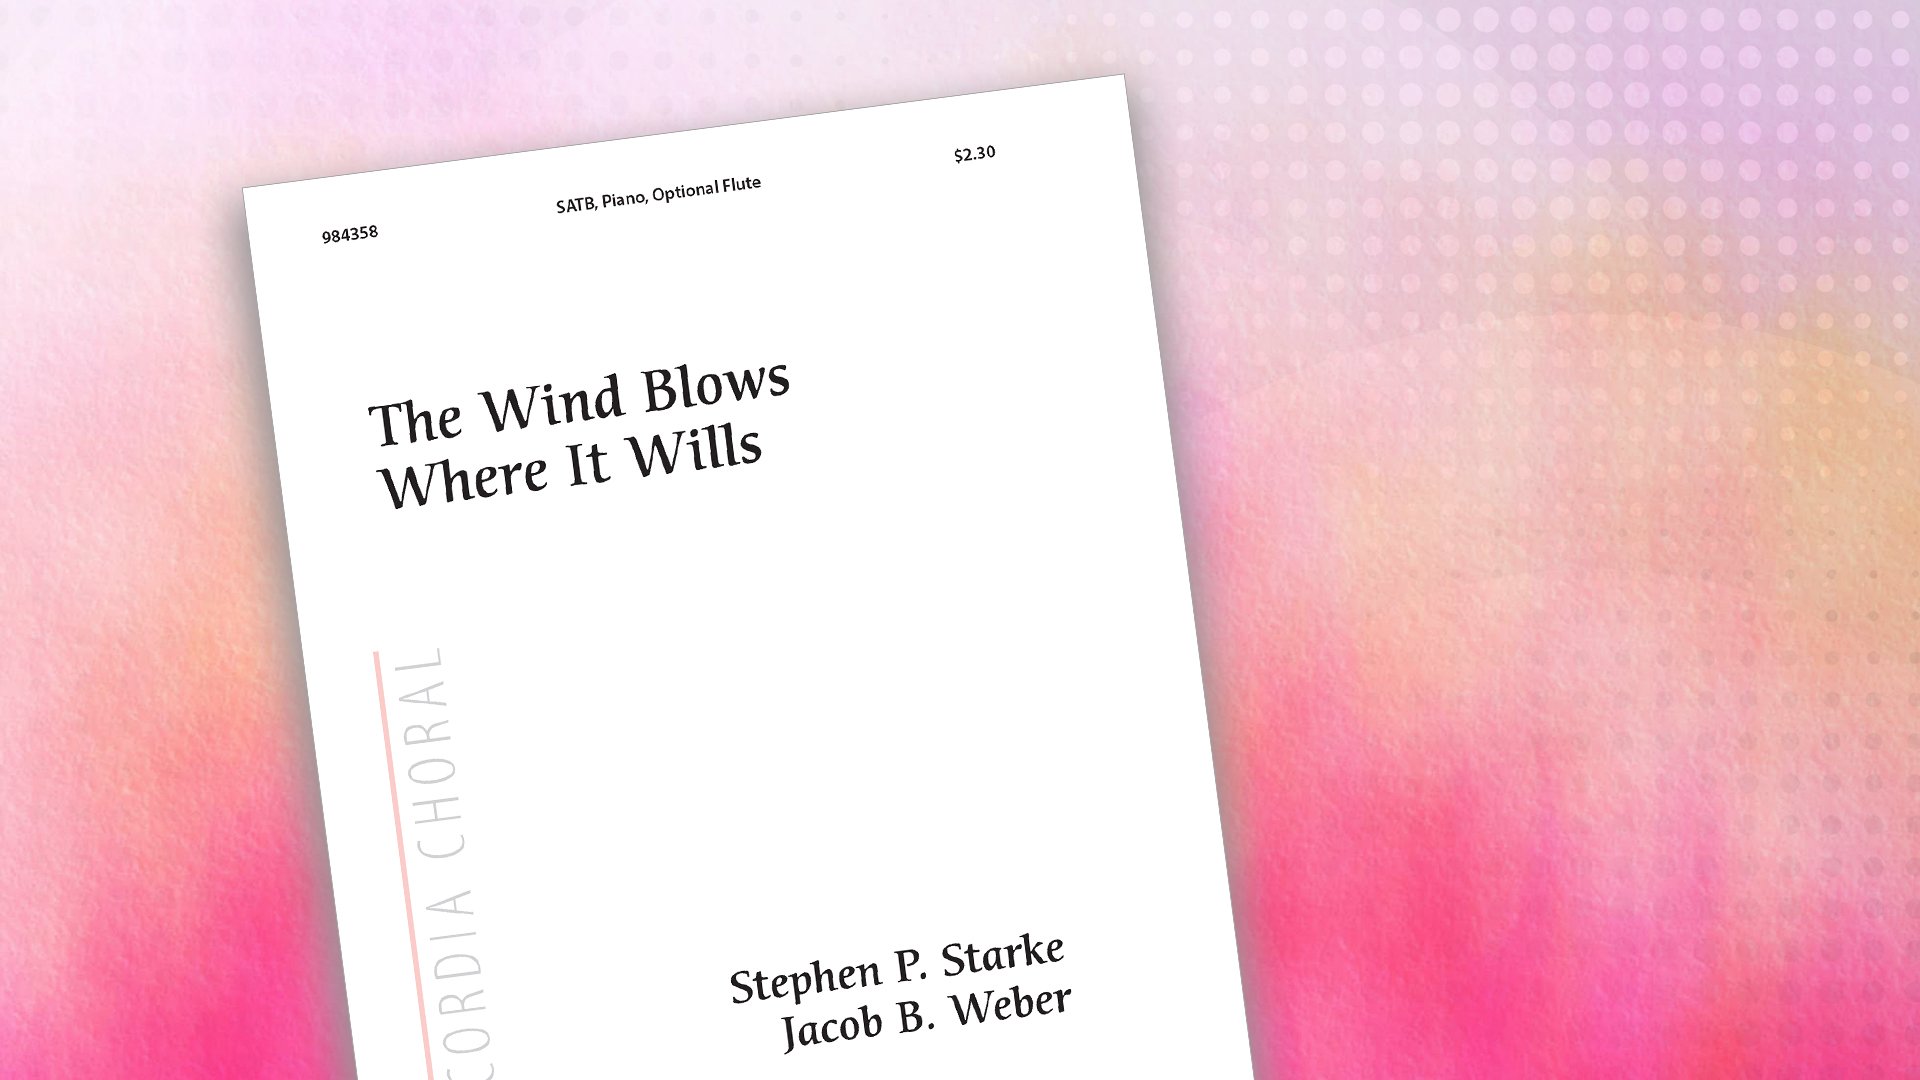 Music of the Month: The Wind Blows Where It Wills